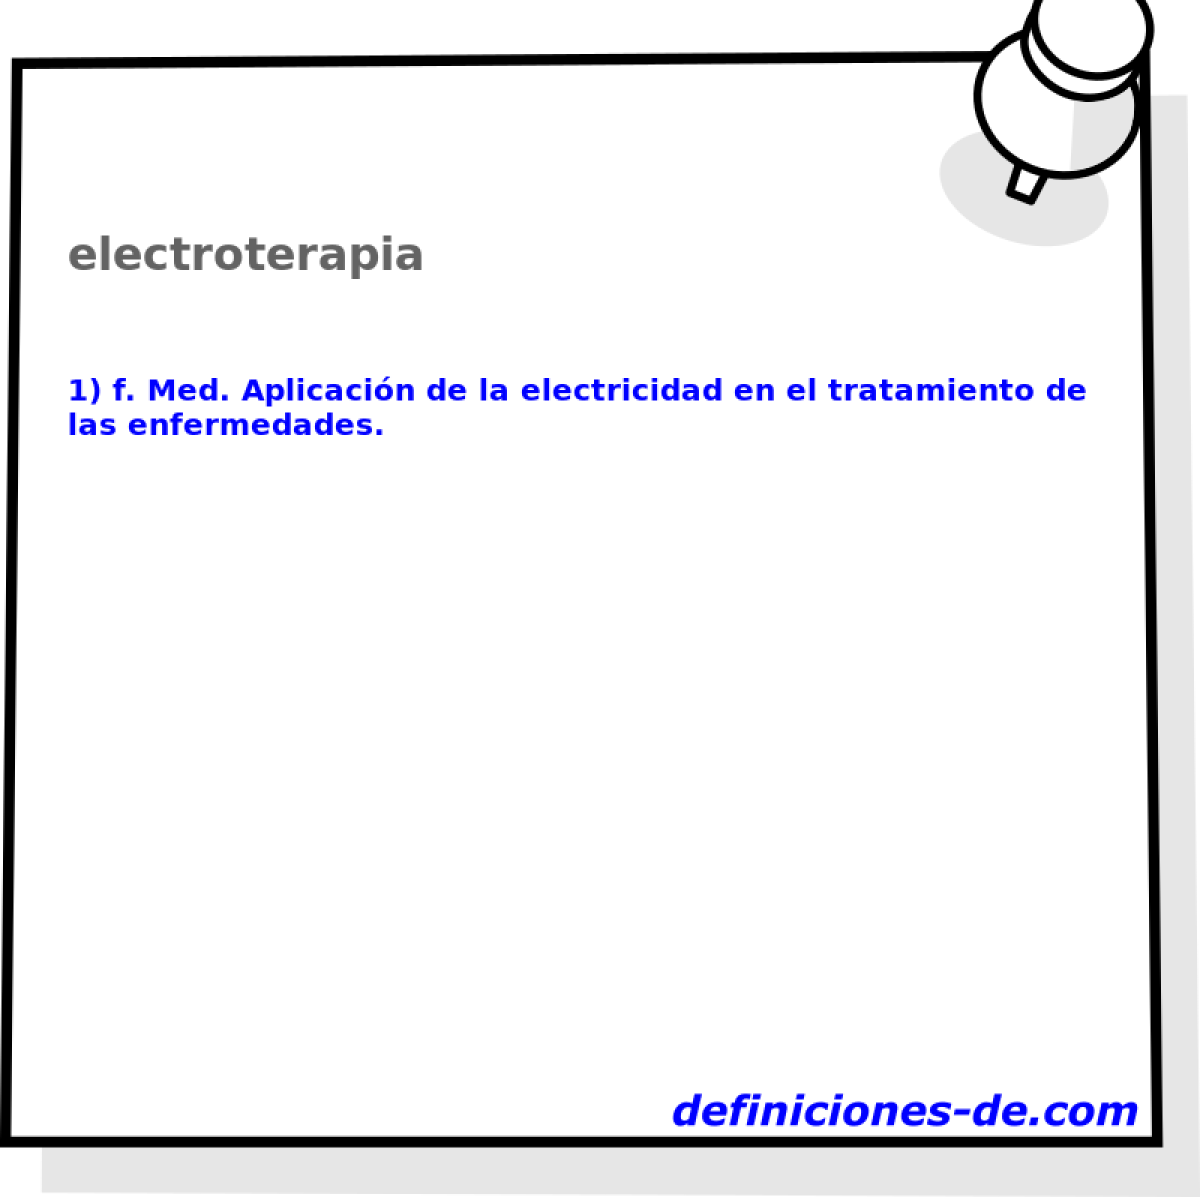 electroterapia 